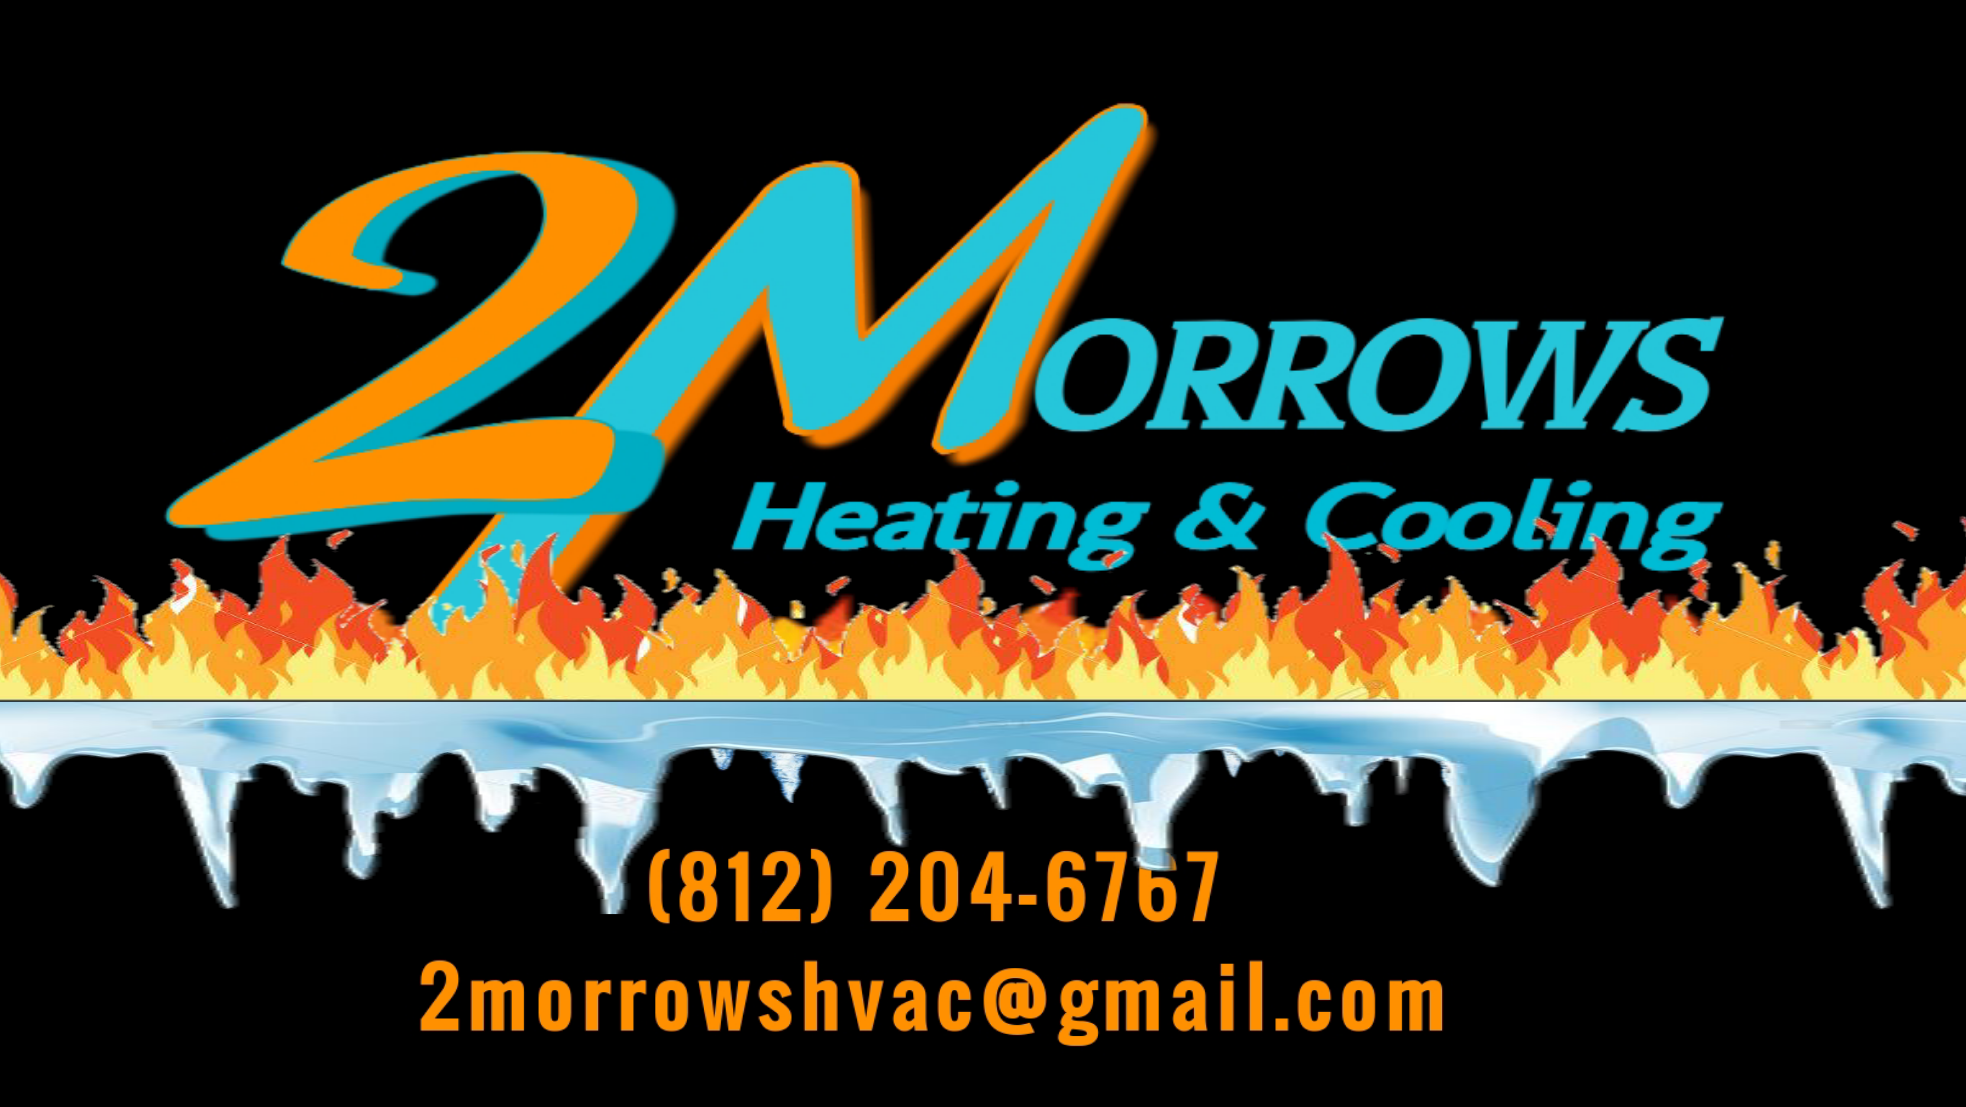 2 Morrows Heating and Cooling 7364 State Rd 66, Wadesville Indiana 47638